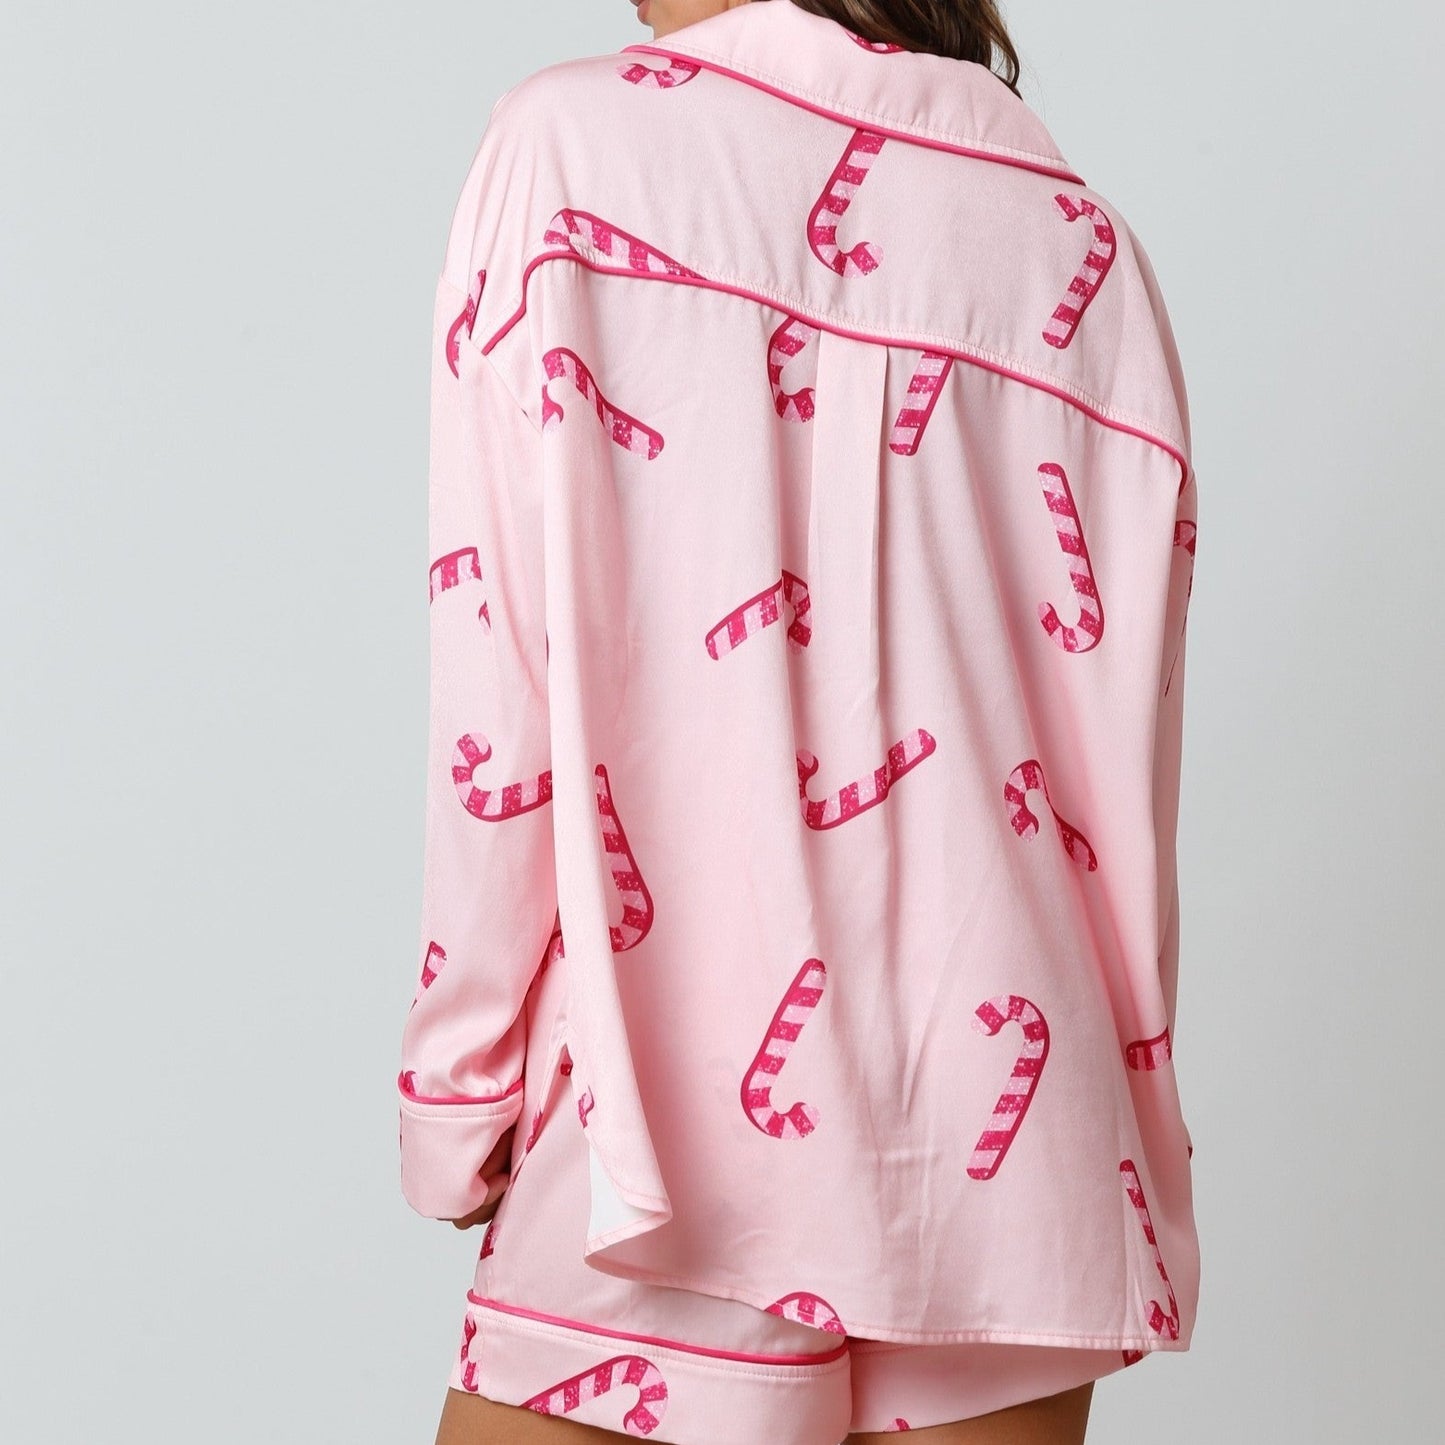 Cane Pattern at Florist Shirt Wells Boutique The Pajama Satin – Candy